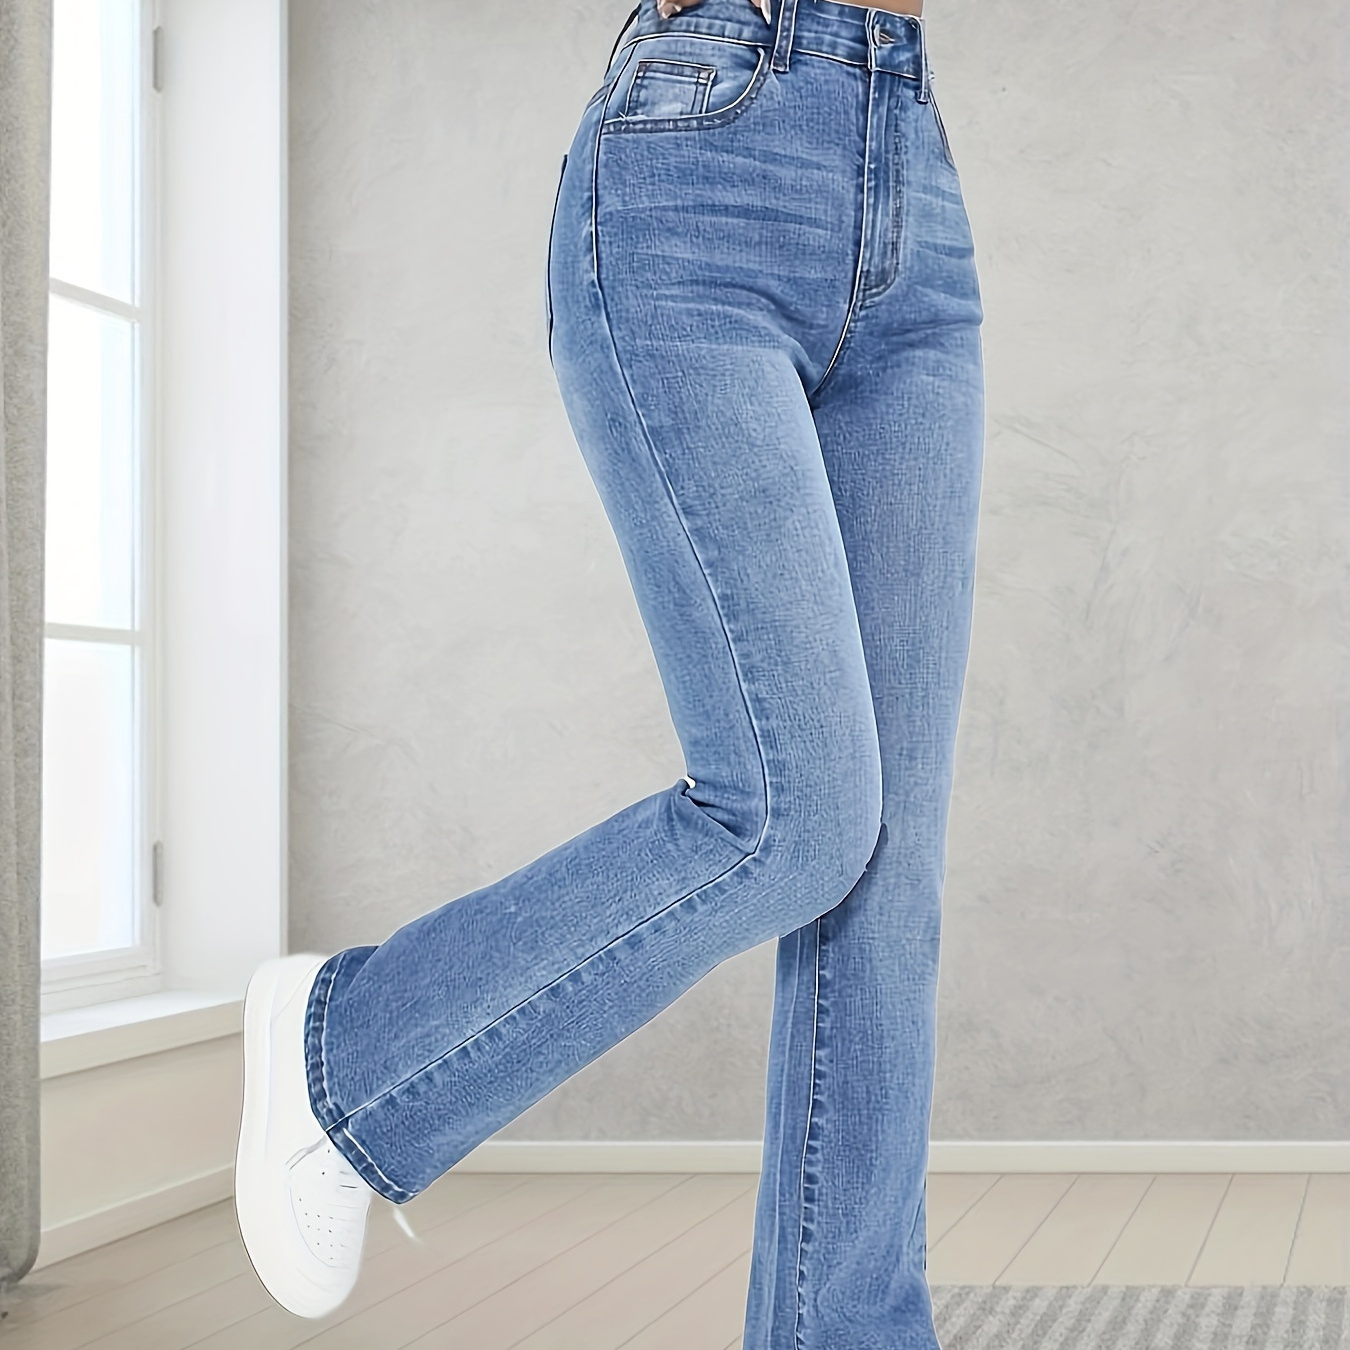 

Plain High-waisted Light Blue Flared Jeans For Women, Fashionable Denim Bell-bottoms, Preppy Style - Perfect For Fall & Winter